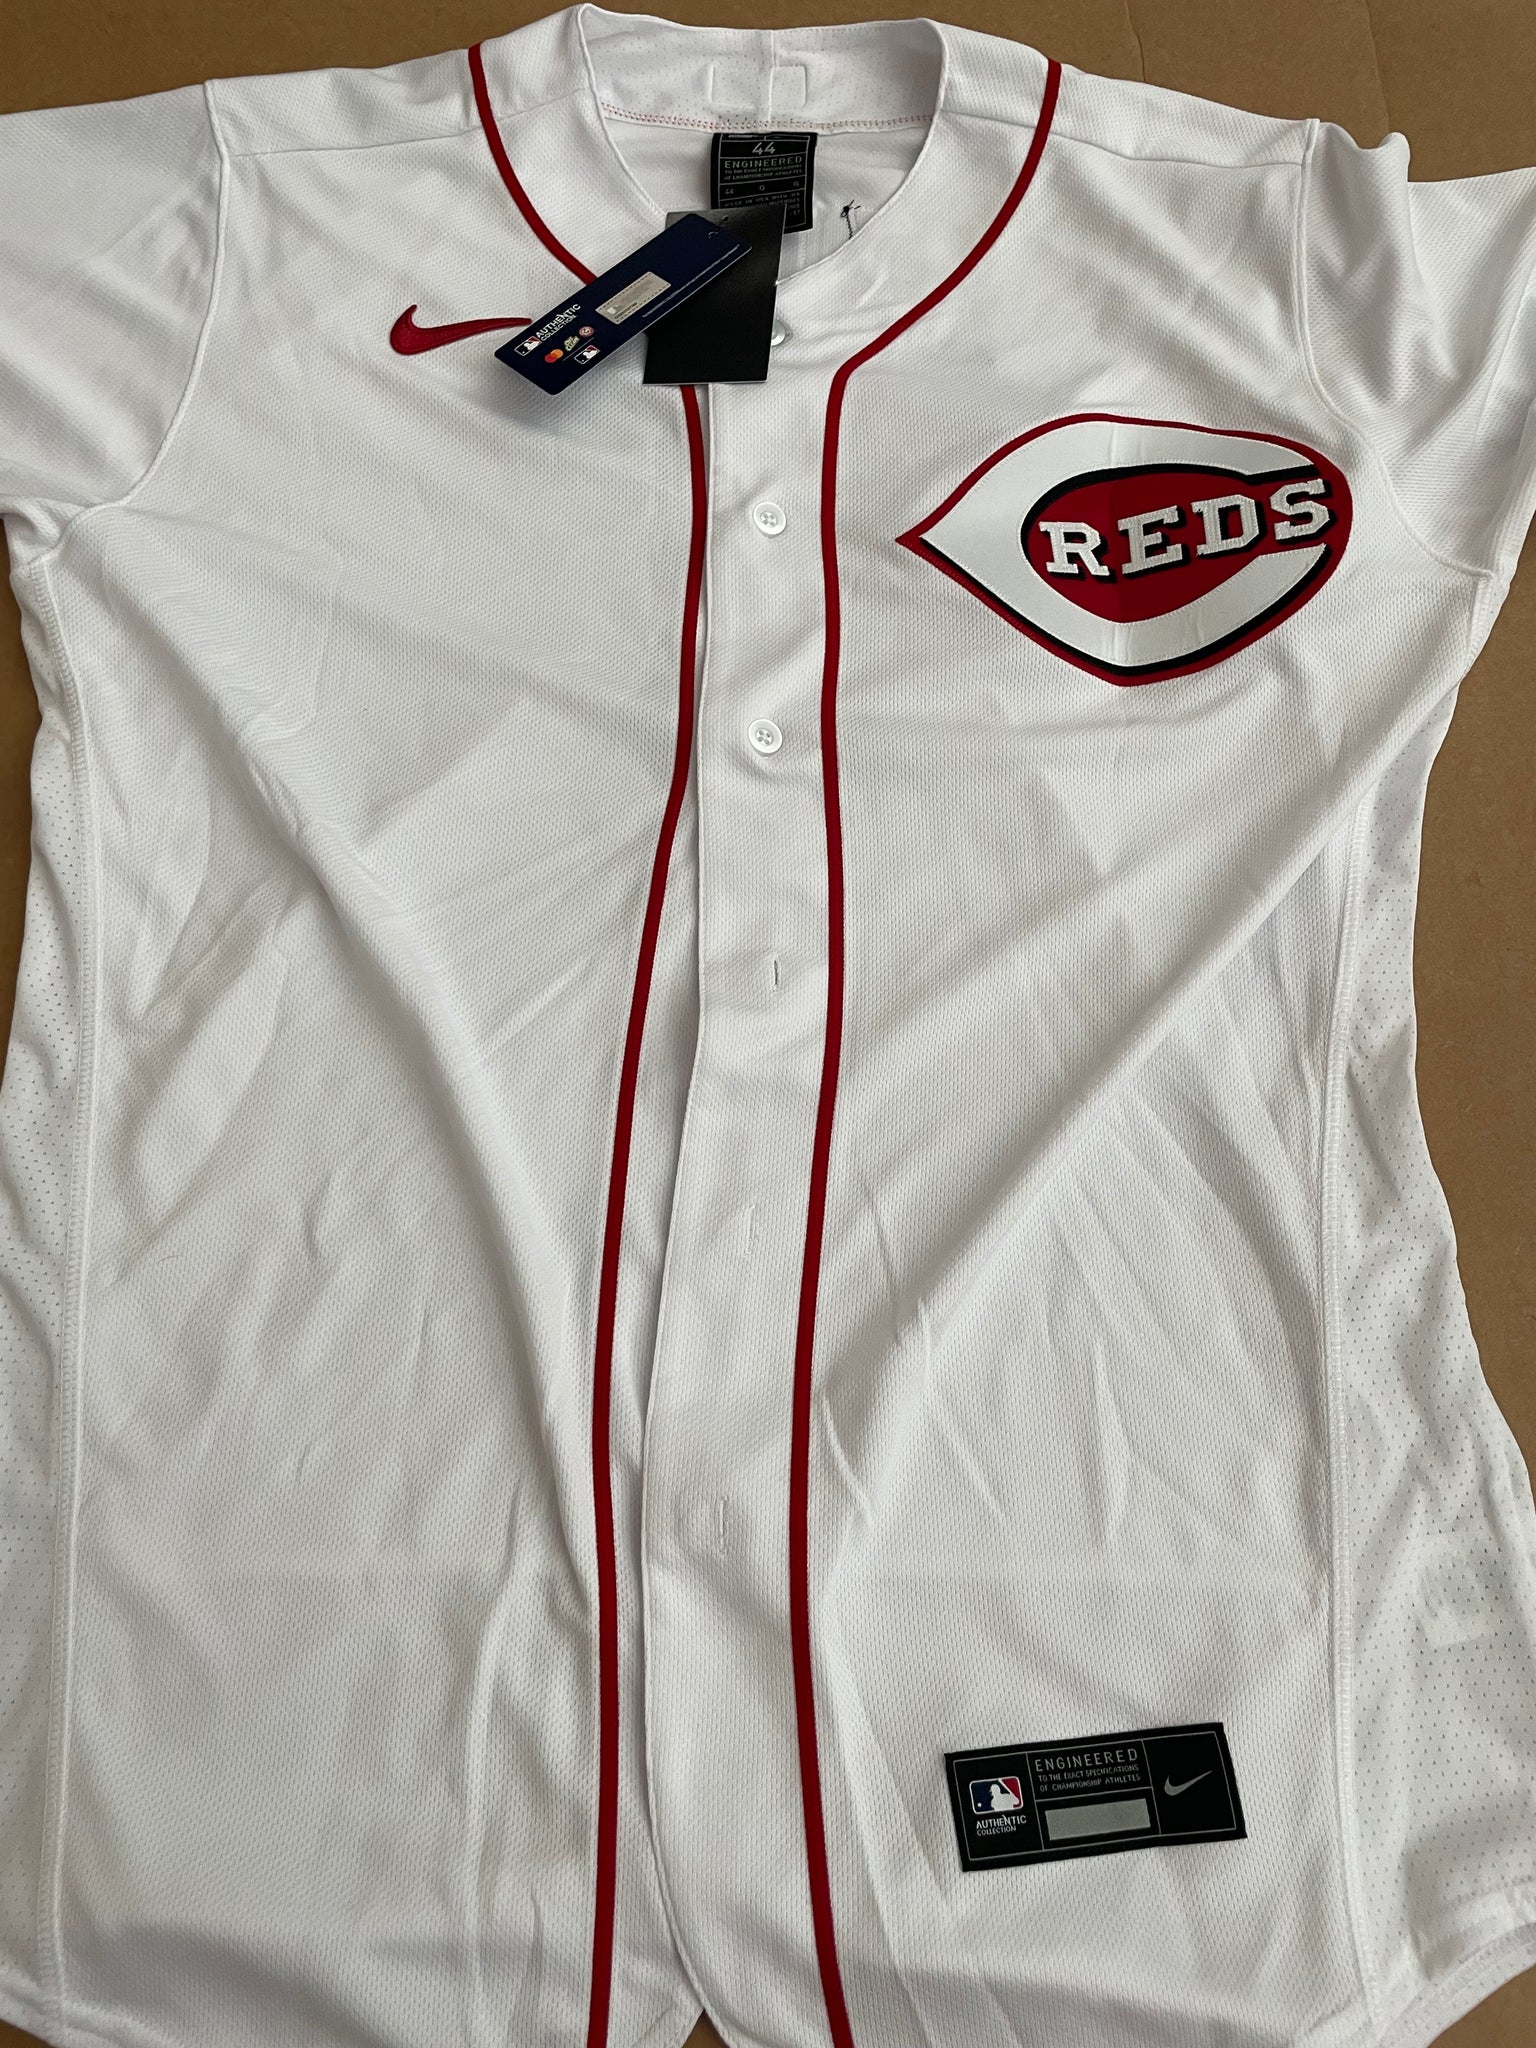 Jonathan India White Cincinnati Reds Autographed Nike Authentic Jersey